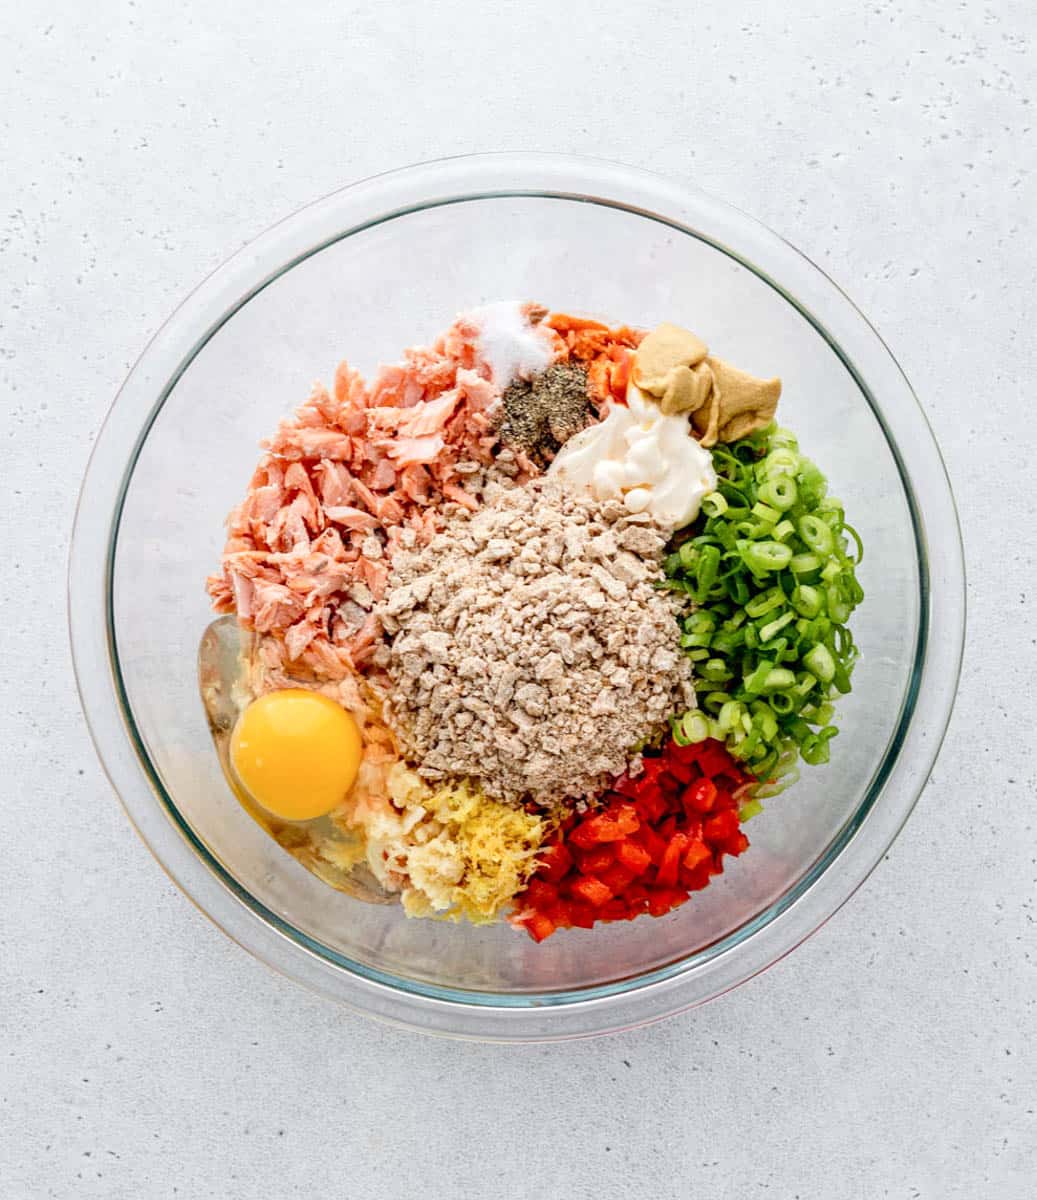 Bell pepper, green onions, egg, whole-wheat cracker crumbs, salmon, seasonings, Dijon, Worcestershire, and mayo in a glass bowl.